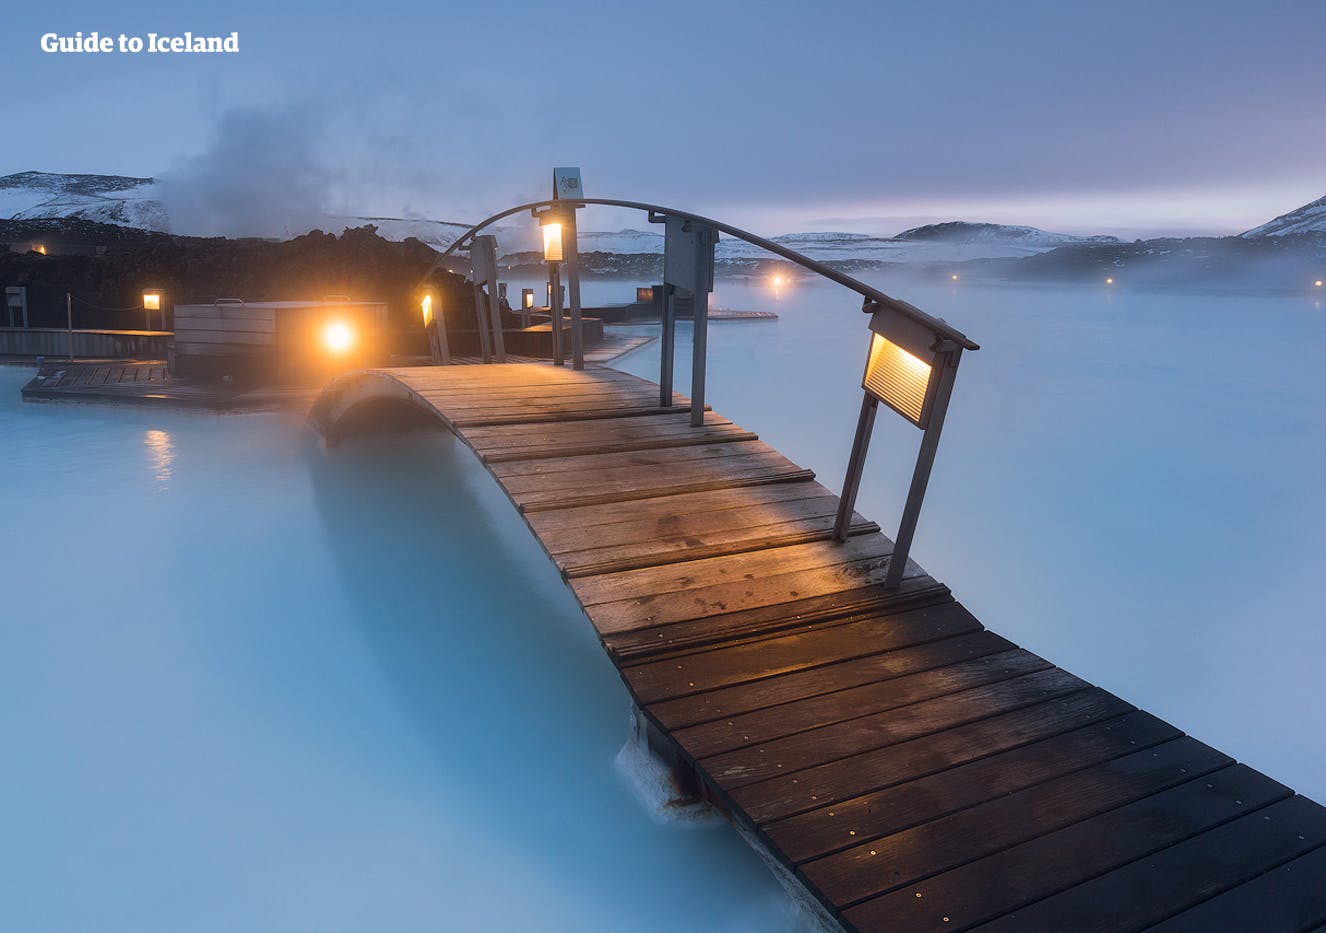 Shortly after you land in Iceland, you can visit the Blue Lagoon and relax in the geothermal, blue water.